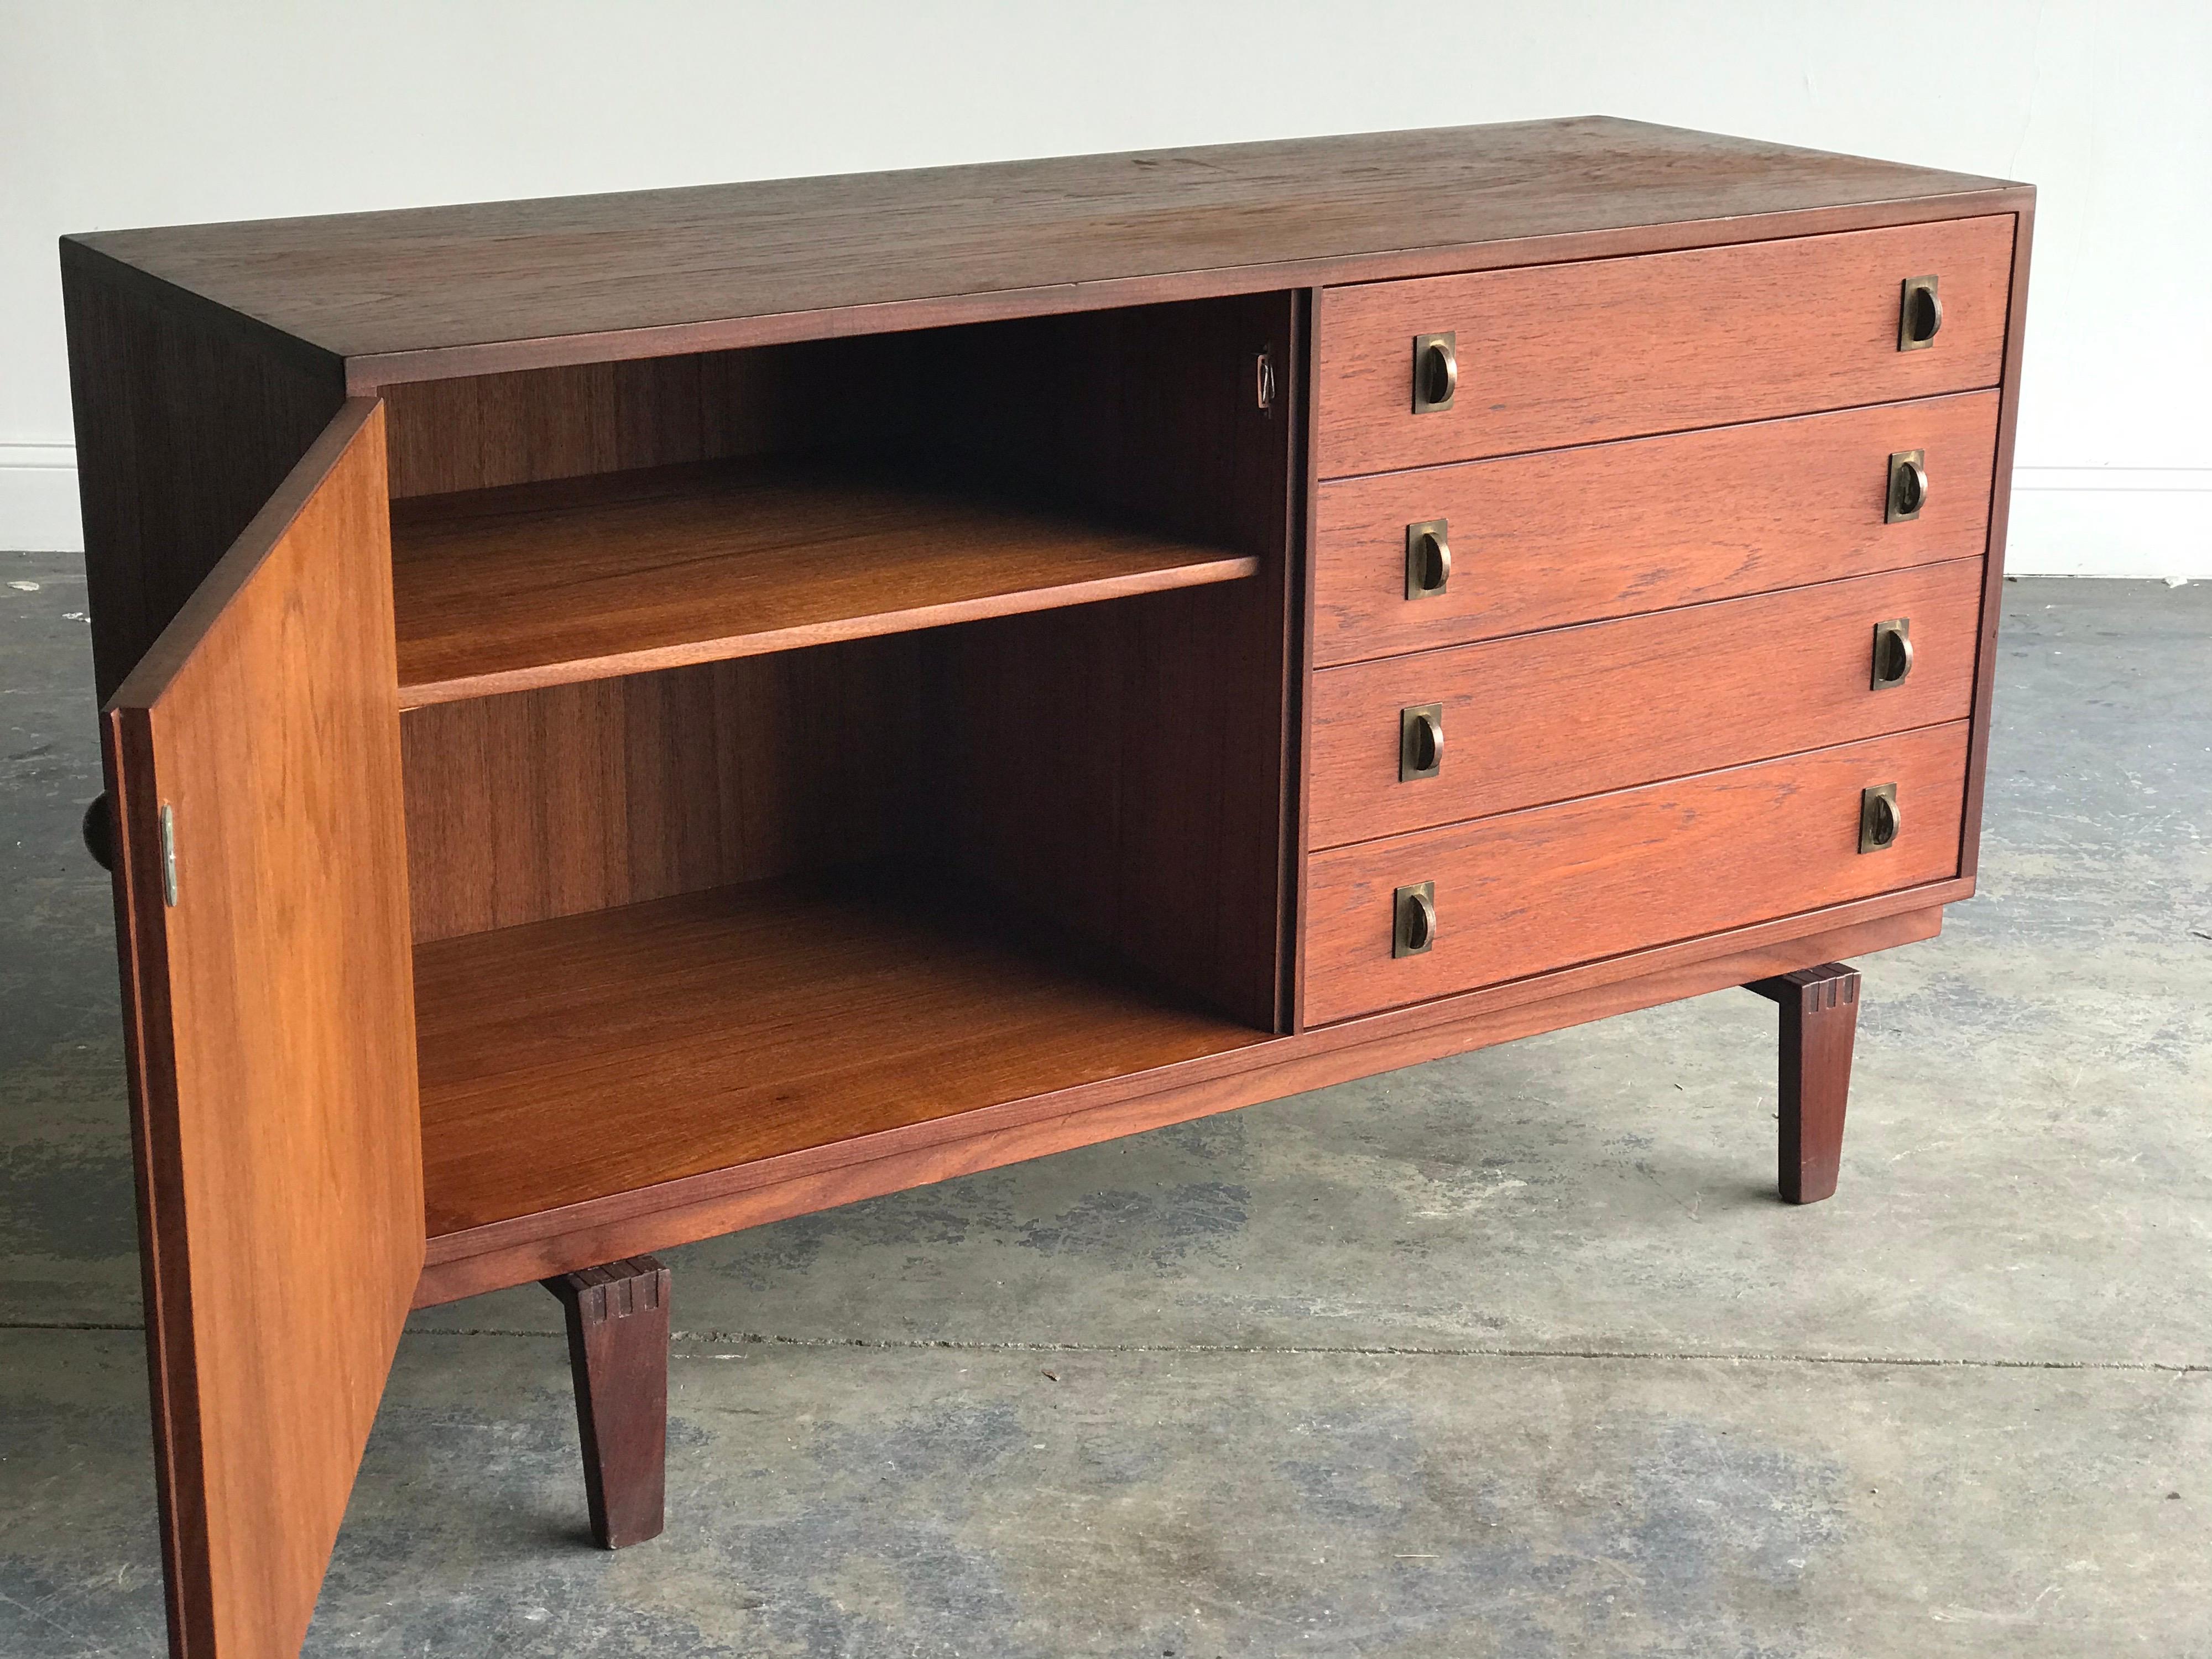 Beautiful petite credenza or sideboard designed by Peter Løvig Nielsen. Four drawers on the right with a door on the left revealing a shelf.